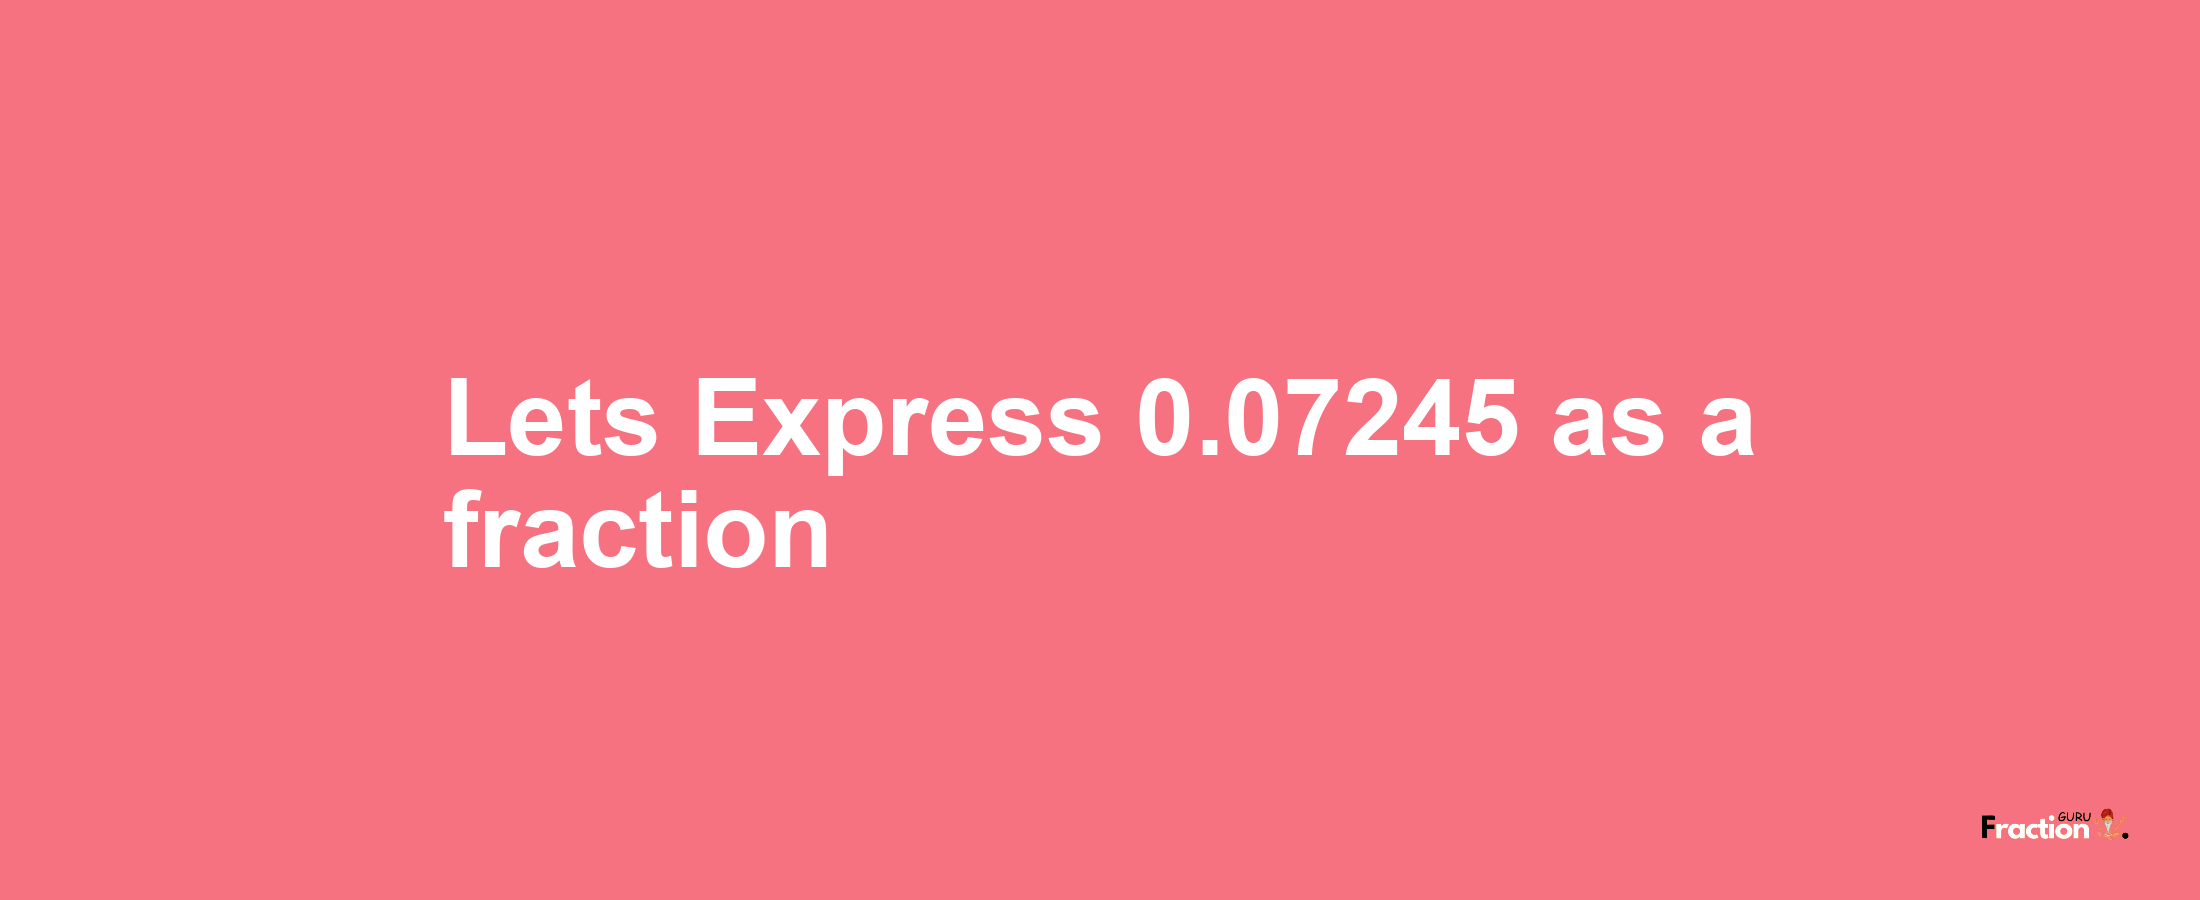 Lets Express 0.07245 as afraction